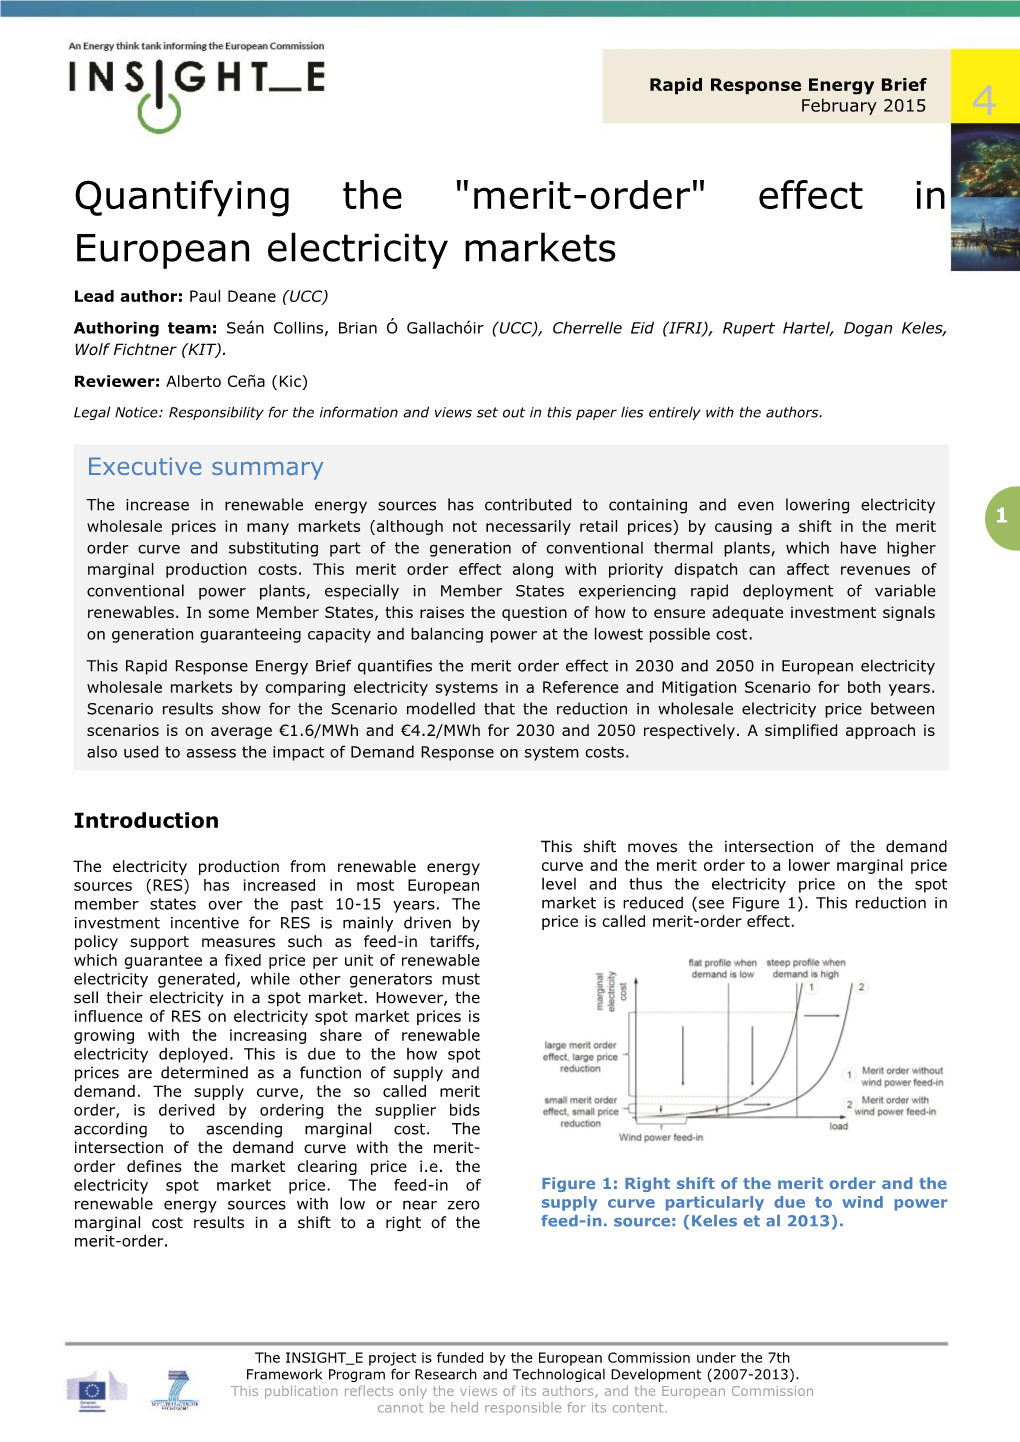 Quantifying the "Merit-Order" Effect in European Electricity Markets